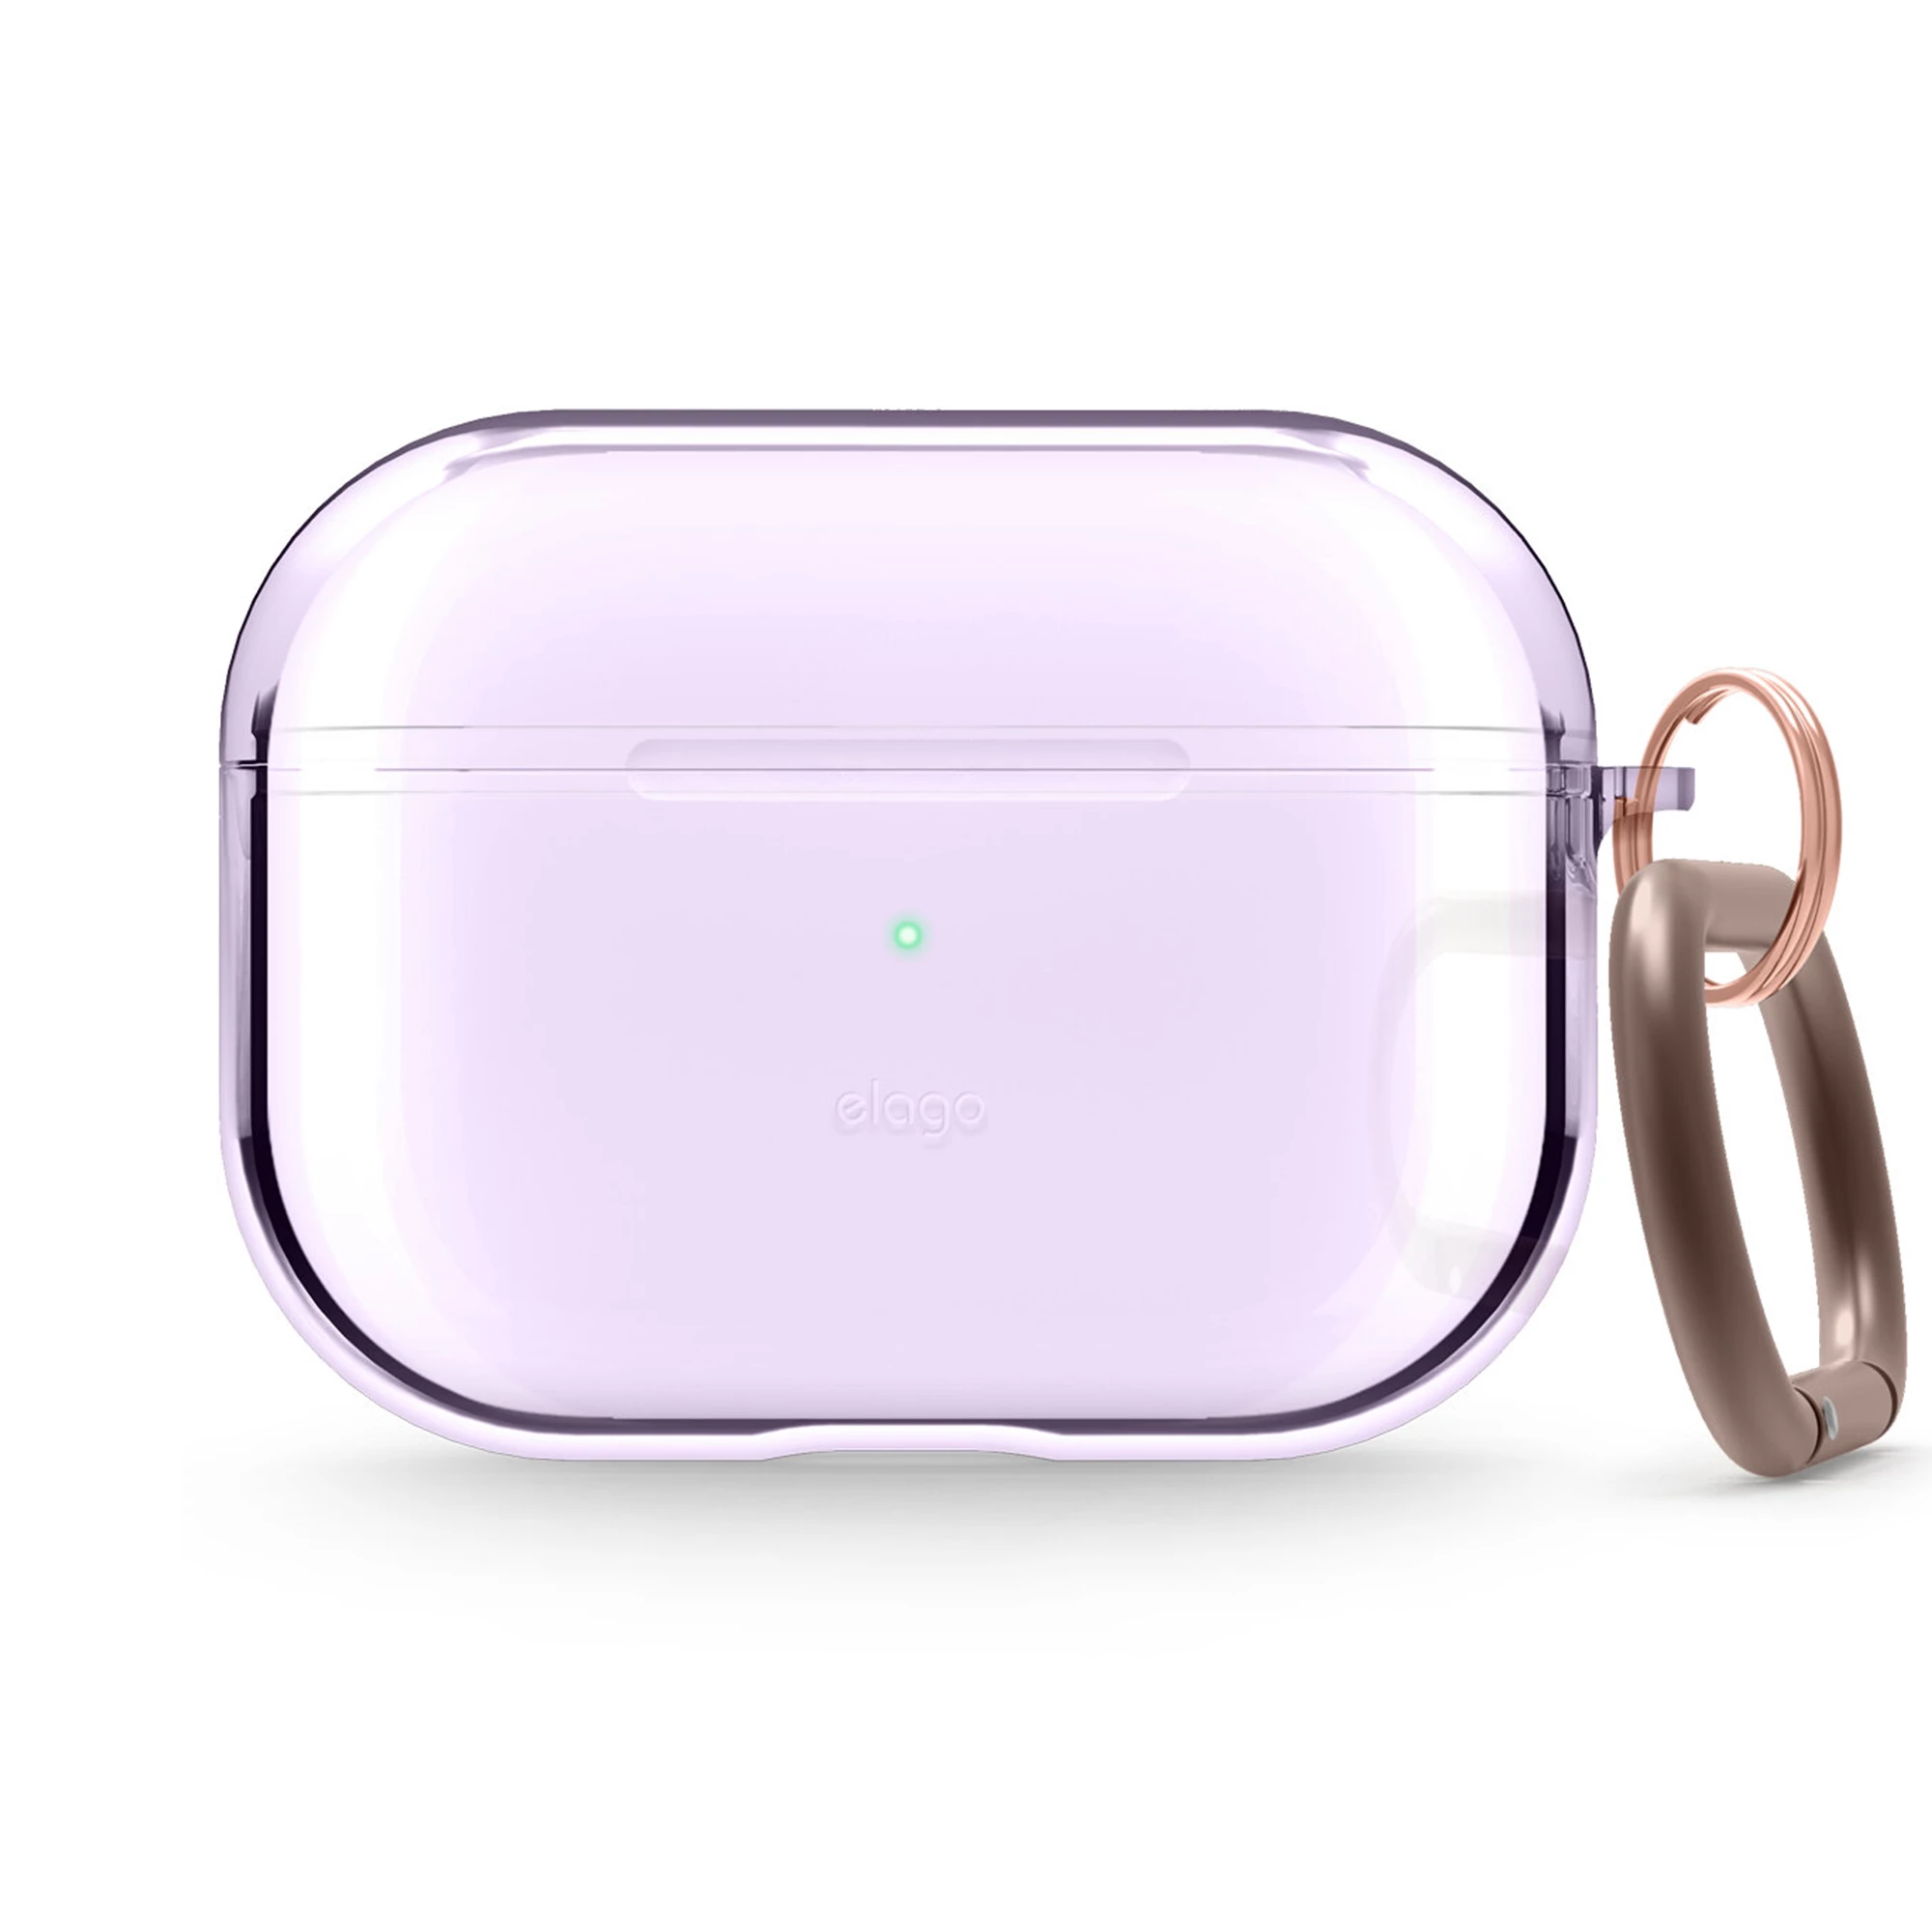 Elago Clear Case for Airpods Pro - Lavender (EAPPCL-HANG-LV)